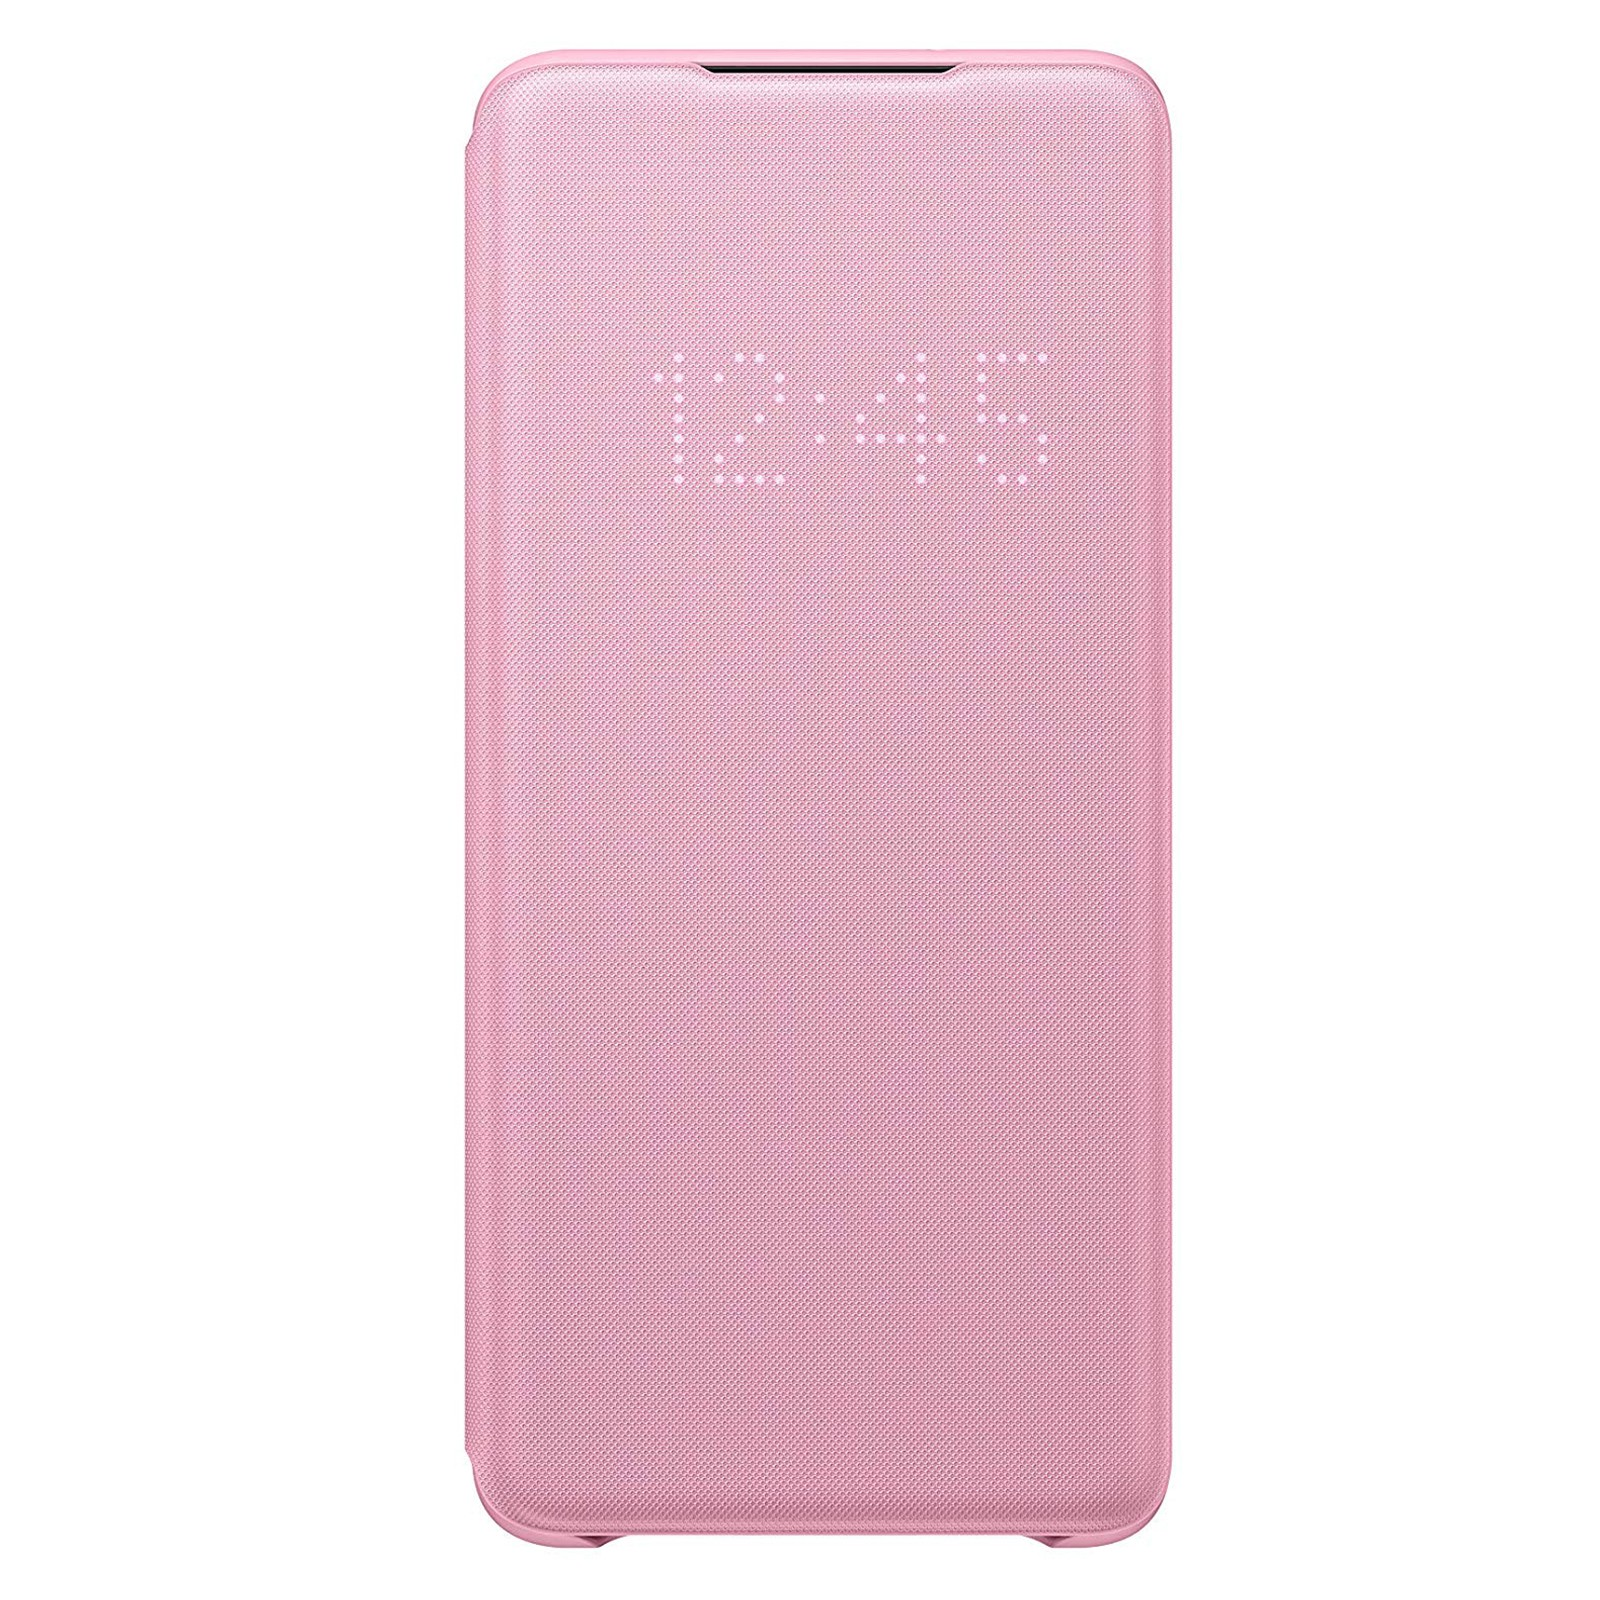 VIEW S20+, PINK, LED EF-NG985 SAMSUNG Samsung, GALAXY Pink COVER Galaxy Bookcover, S20+